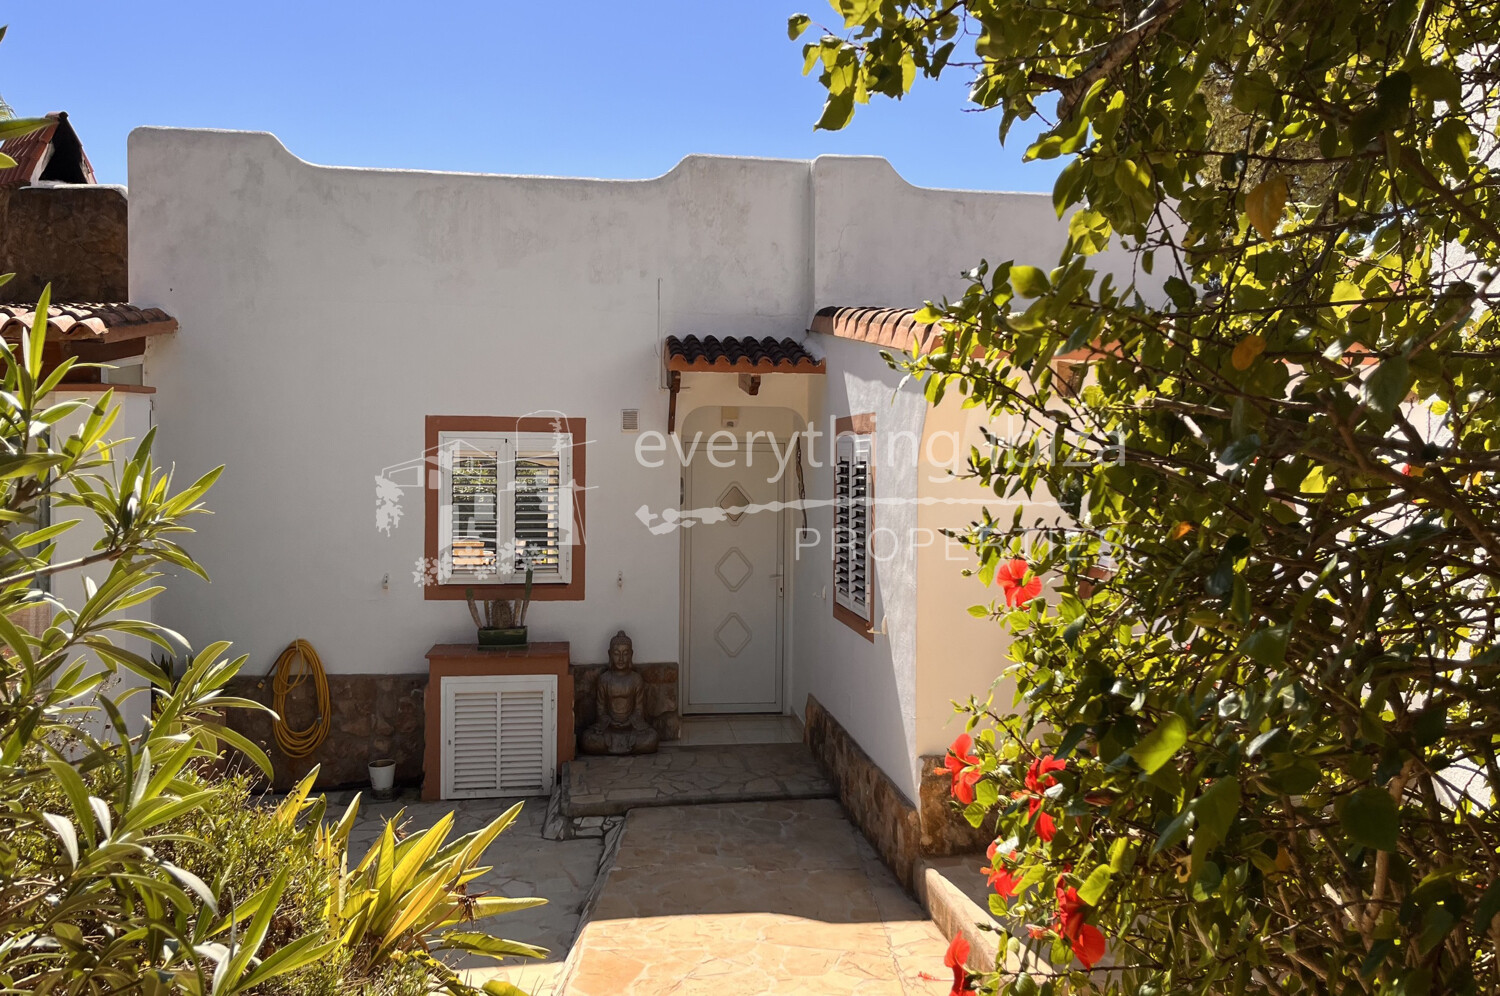 Villa in Scenic Location Close to Idyllic North Coast Beaches, ref. 1641, for sale in Ibiza by everything ibiza Properties